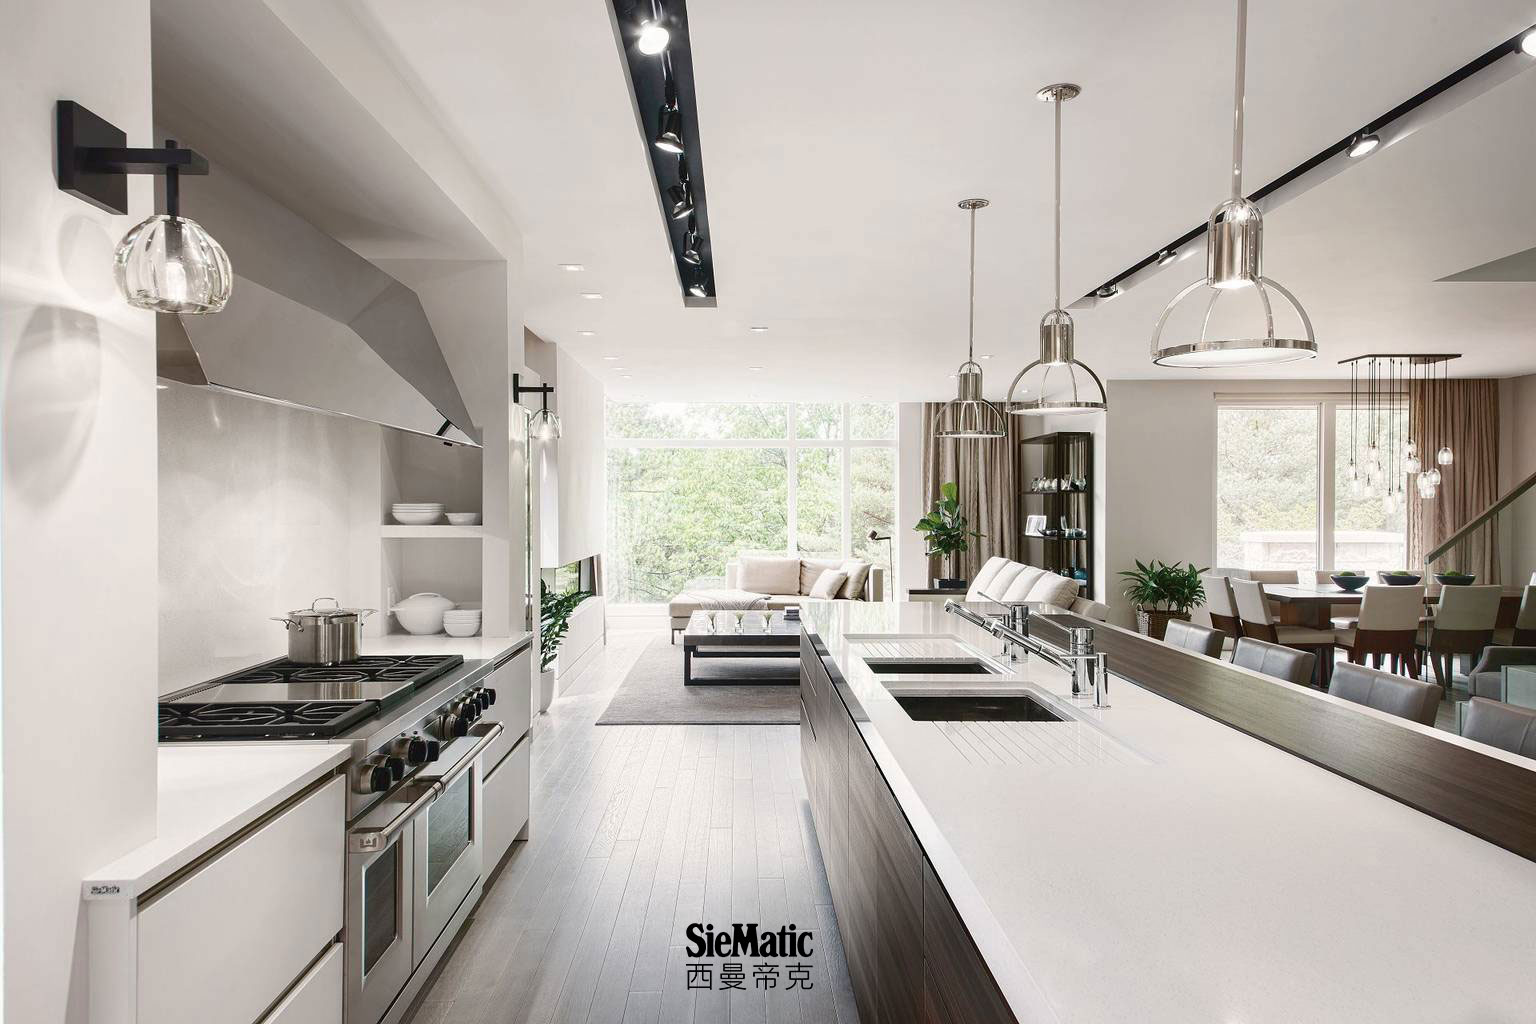 Versatile countertop materials available for kitchens from the SieMatic Classic style collection